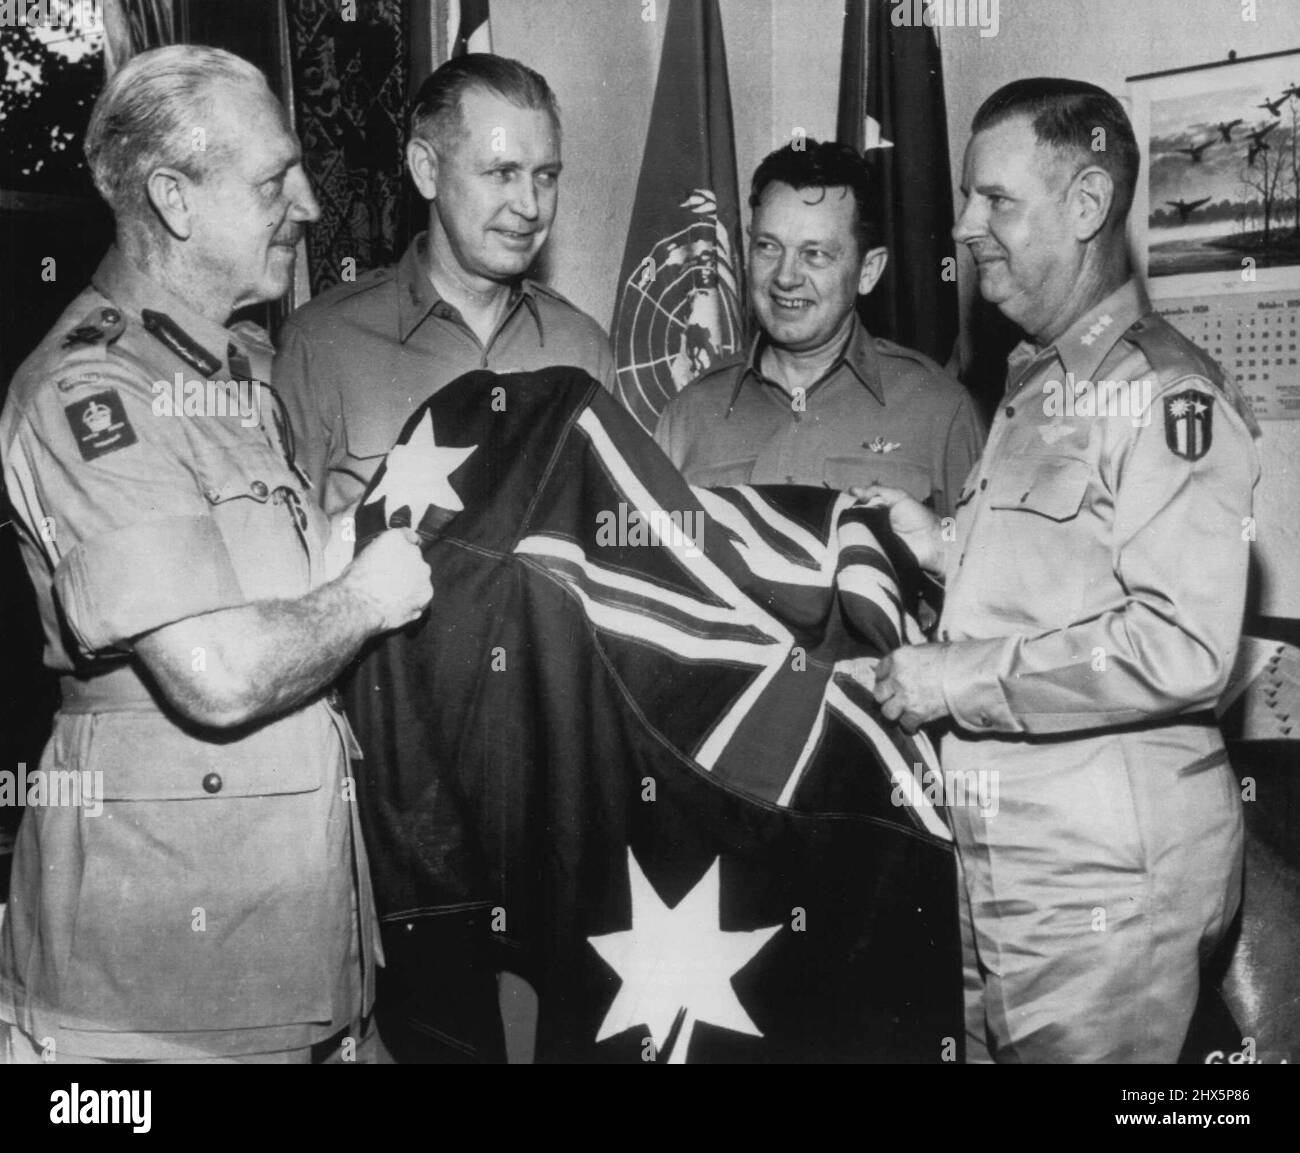 Close coordination between Australian United States Air Force units was the highlight of the above scene (Oct.13) as Lt. Gen. Sir Horace C.H. Robertson (left), commanding the British Commonwealth Occupational Forces, presents the national flag of his country to Lt. Gen. George E. Stratmeyer (right) Commanding General, Far East Air Forces. Mr. Gens. O.P. Weyland(center, left) and L.C. Craigie (center, right), witness the ceremony. October 16, 1950. (Photo by Associated Press). Stock Photo